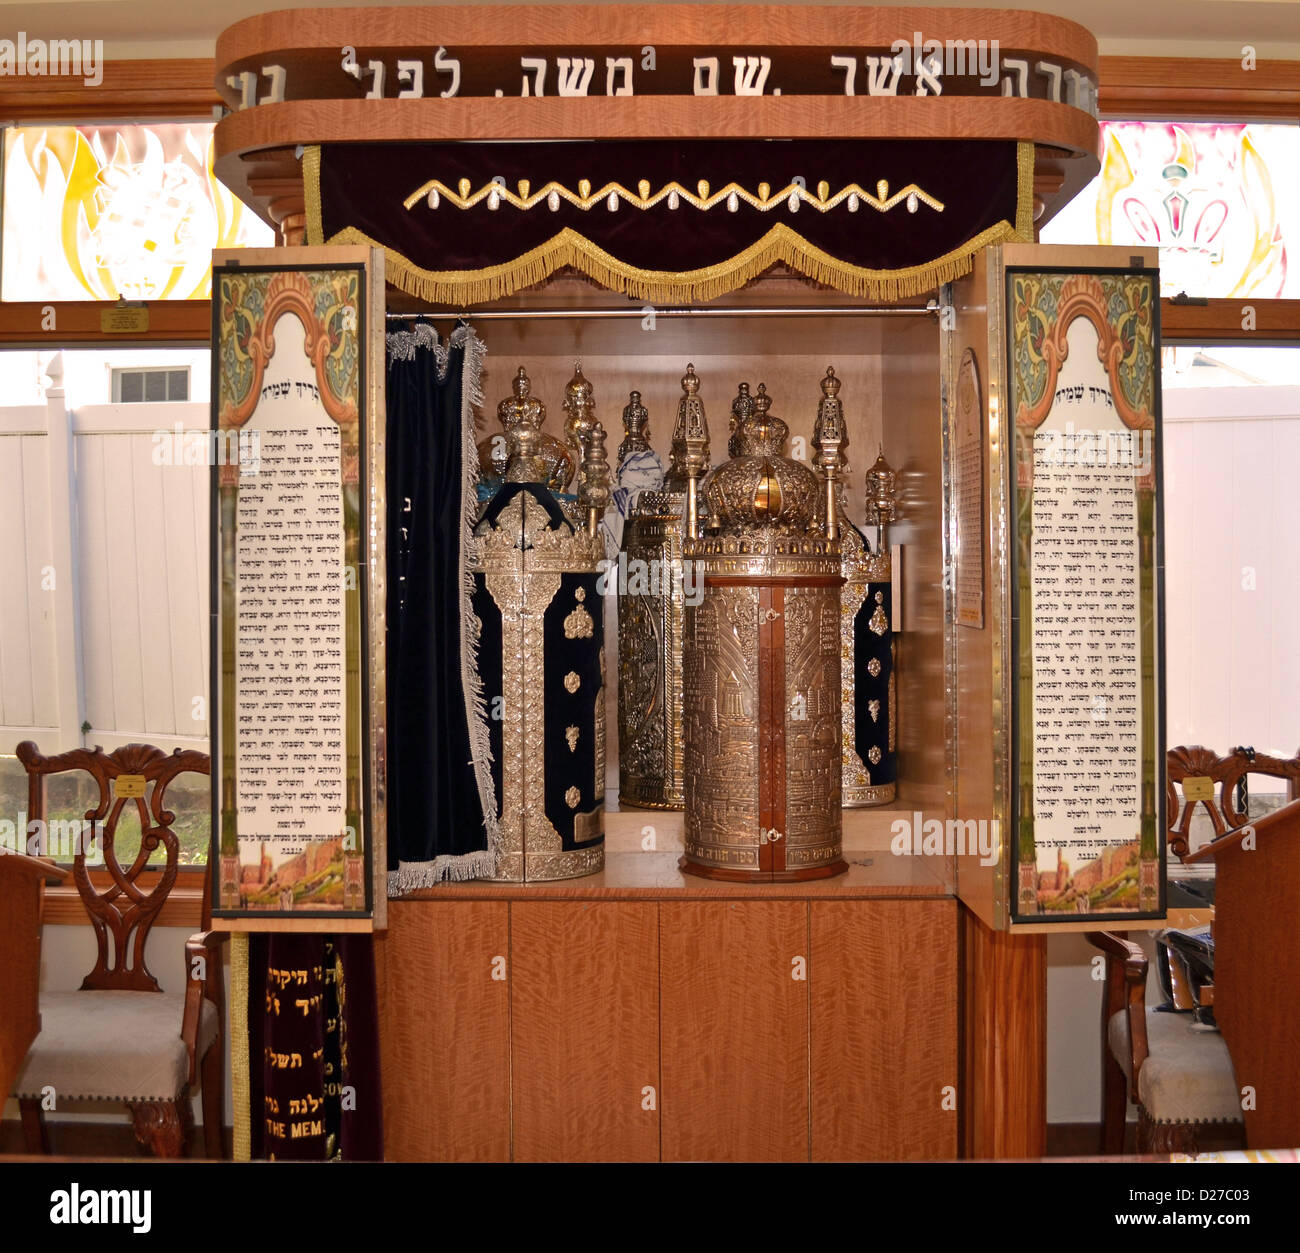 Top 93+ Images where the torah is kept in a synagogue Stunning